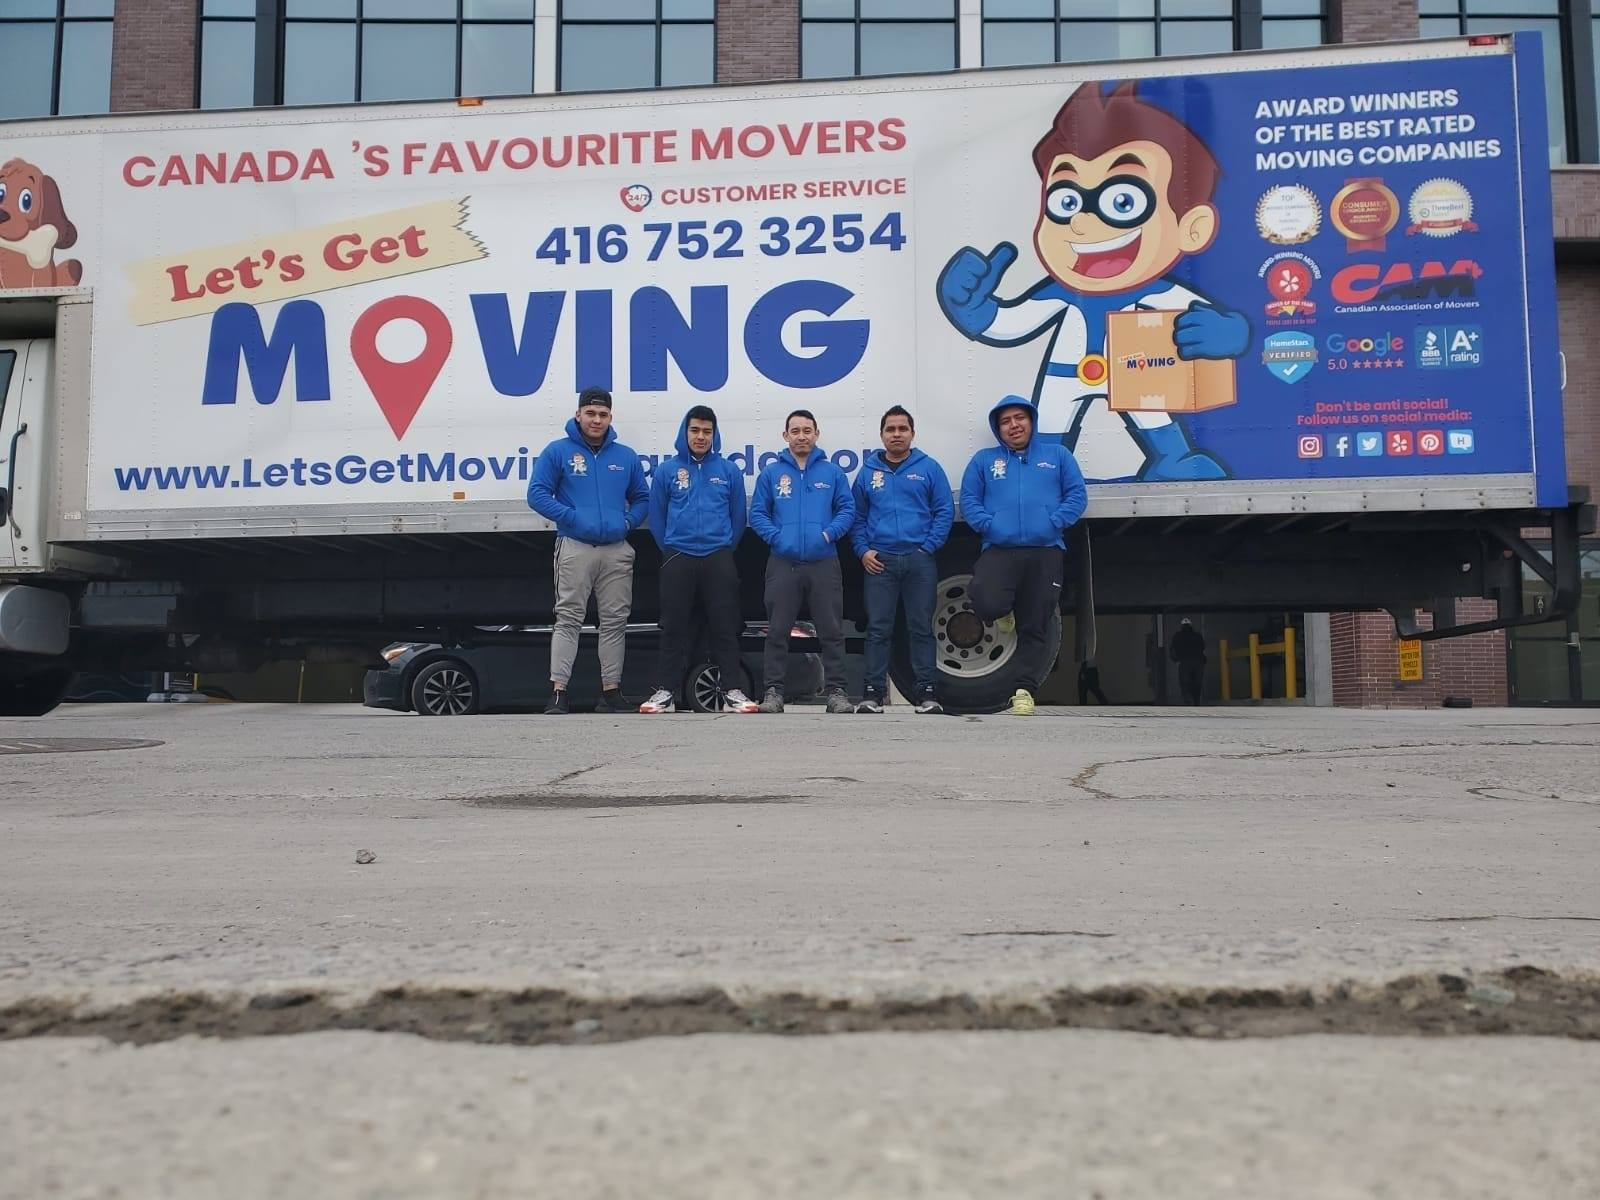 Best Moving Companies Toronto Best Toronto movers for professional moving and storage services at short notice. Book your local move with Let's Get Moving, top moving company at affordable price. by Lets Get Moving  Vancouver Moving Company